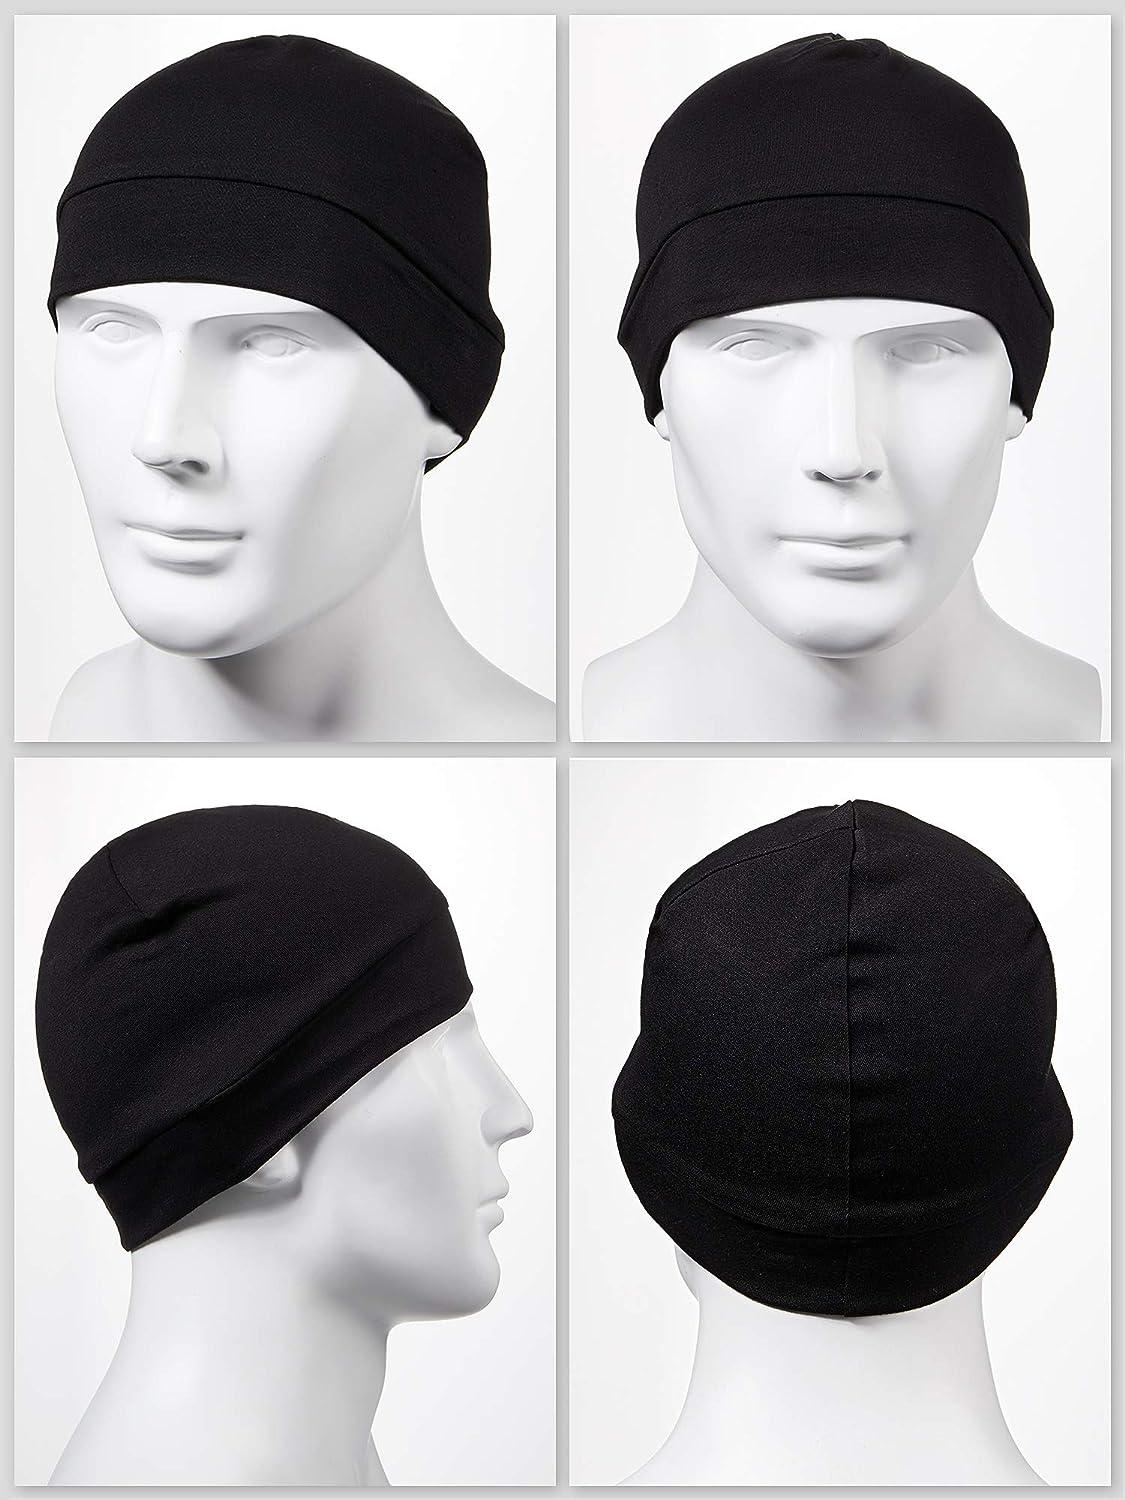 Syhood 4 Pieces Men Skull Caps Soft Cotton Beanie Sleep Hats Stretchy Helmet  Liner Multifunctional Headwear for Men Women Black, Gray, Army Green, Navy  Blue Solid Style